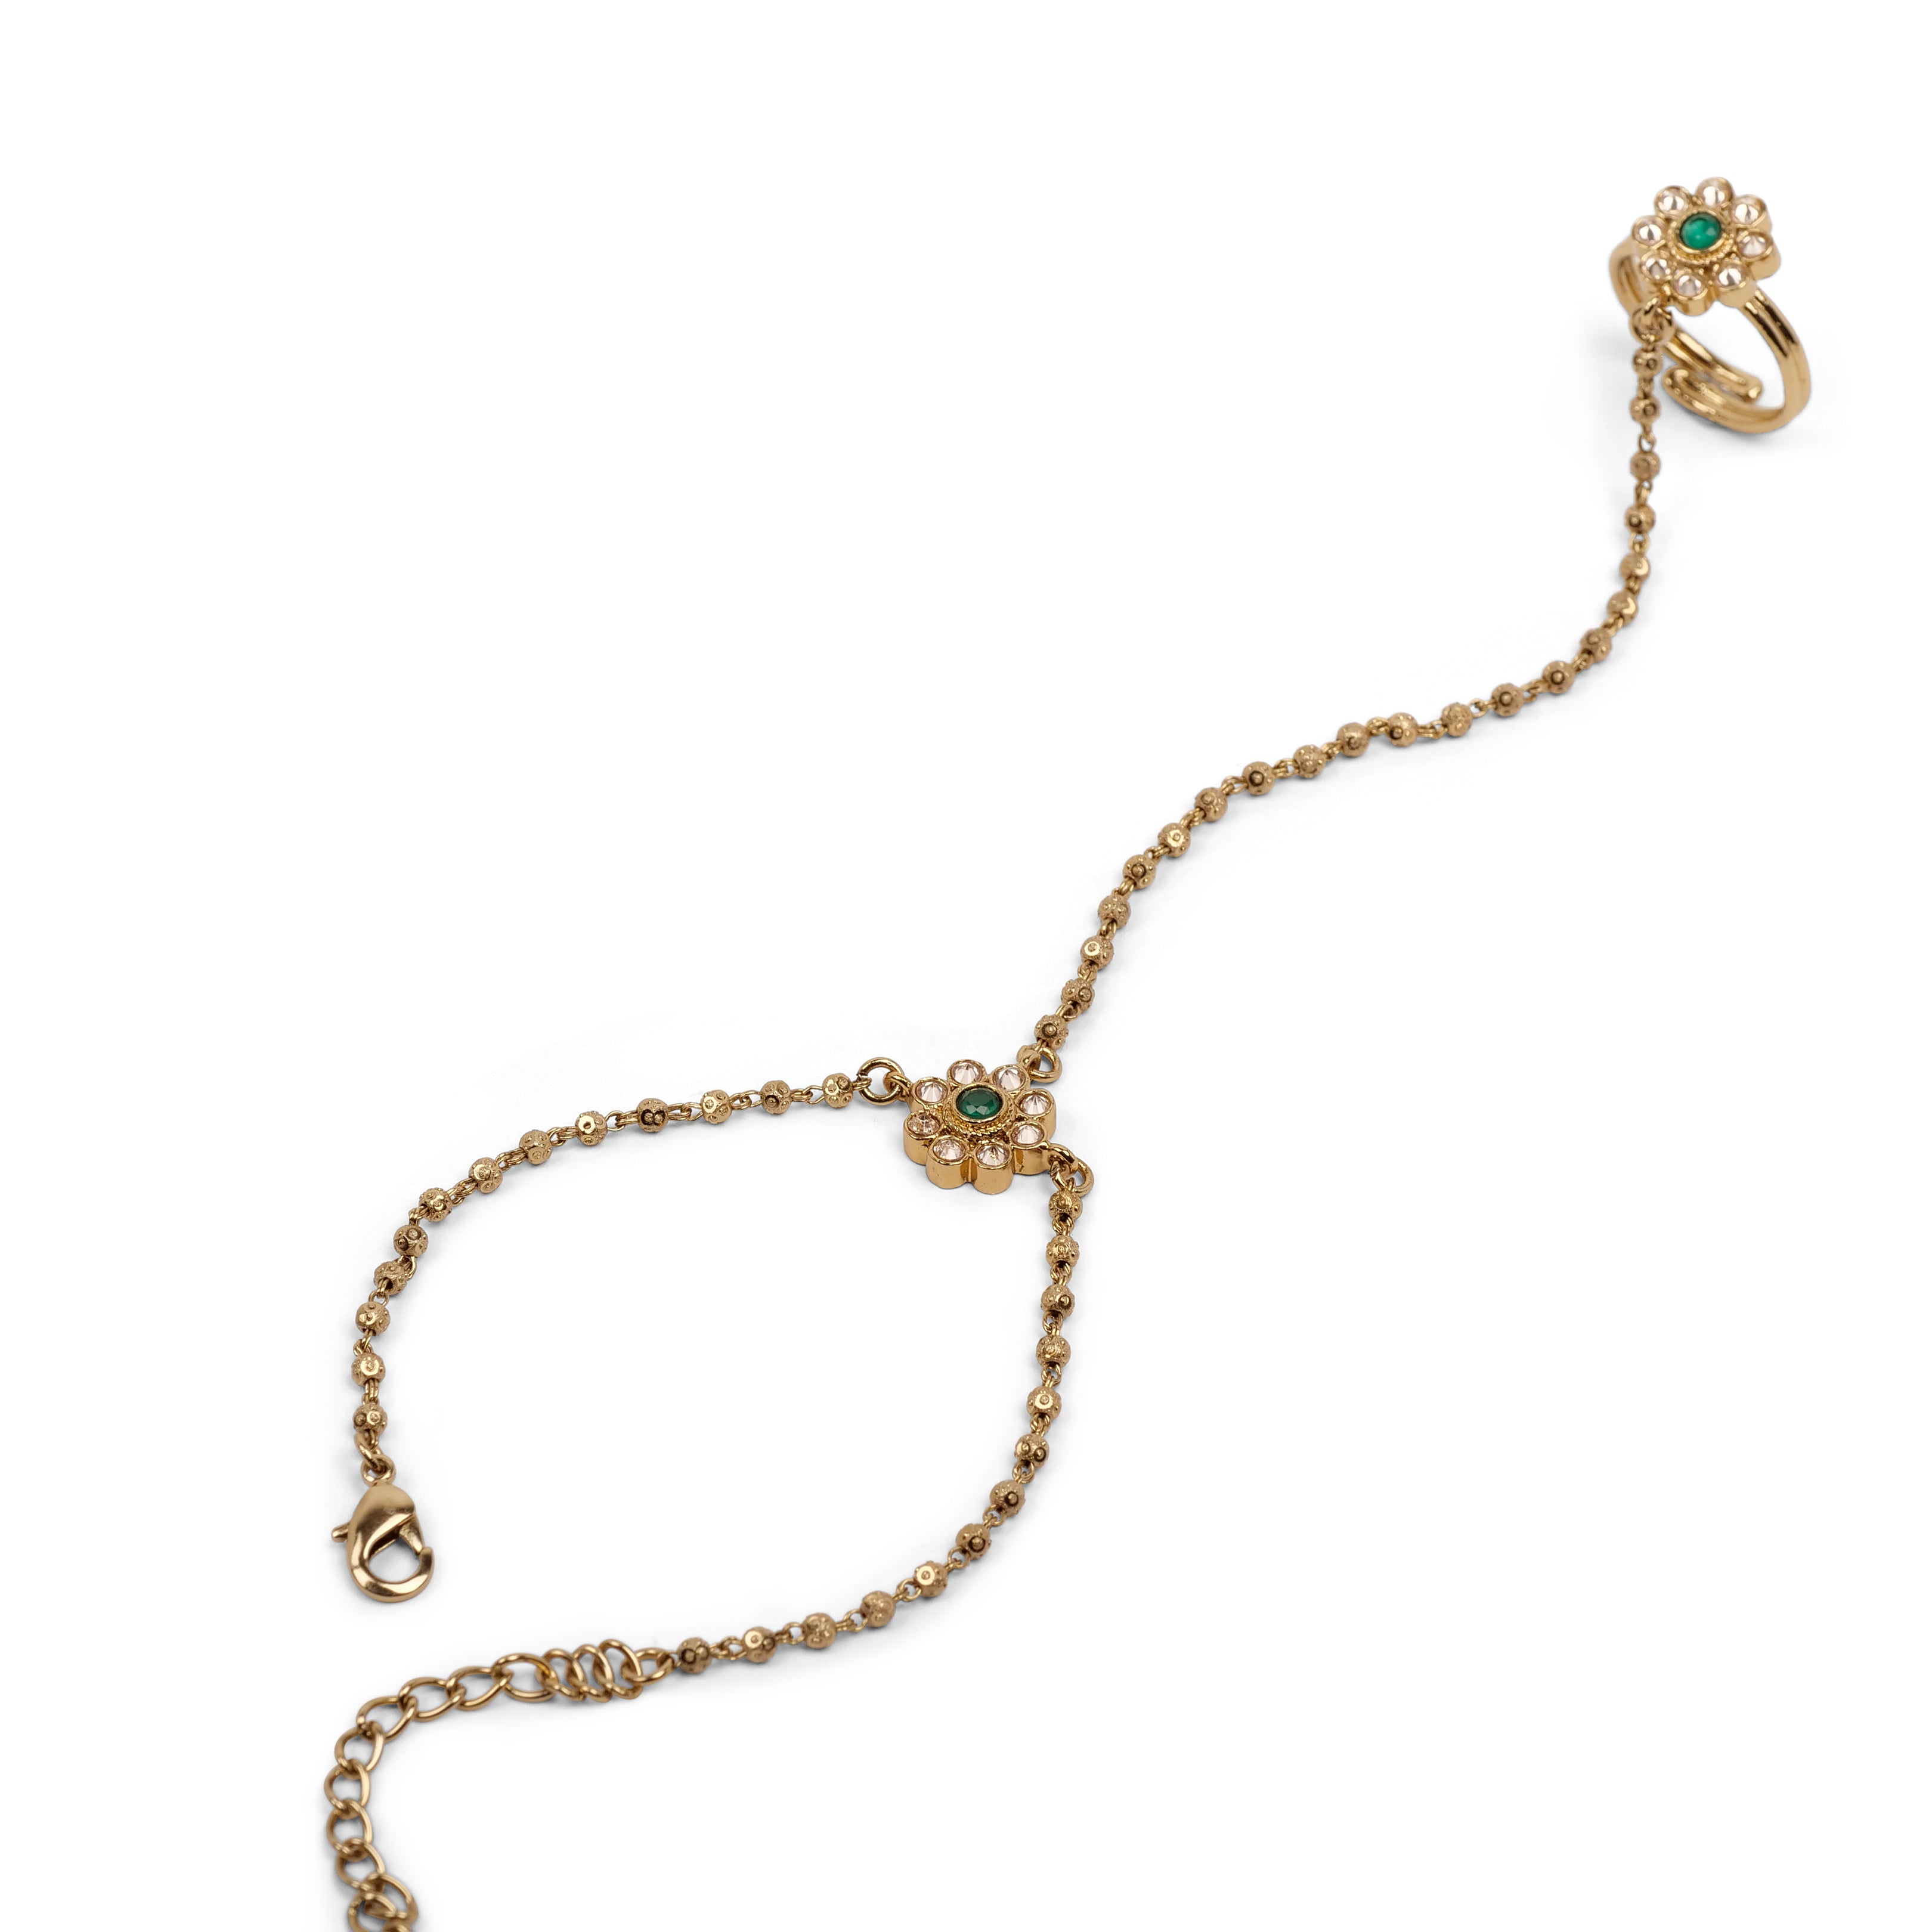 Forever Floral Hand Chain in Green